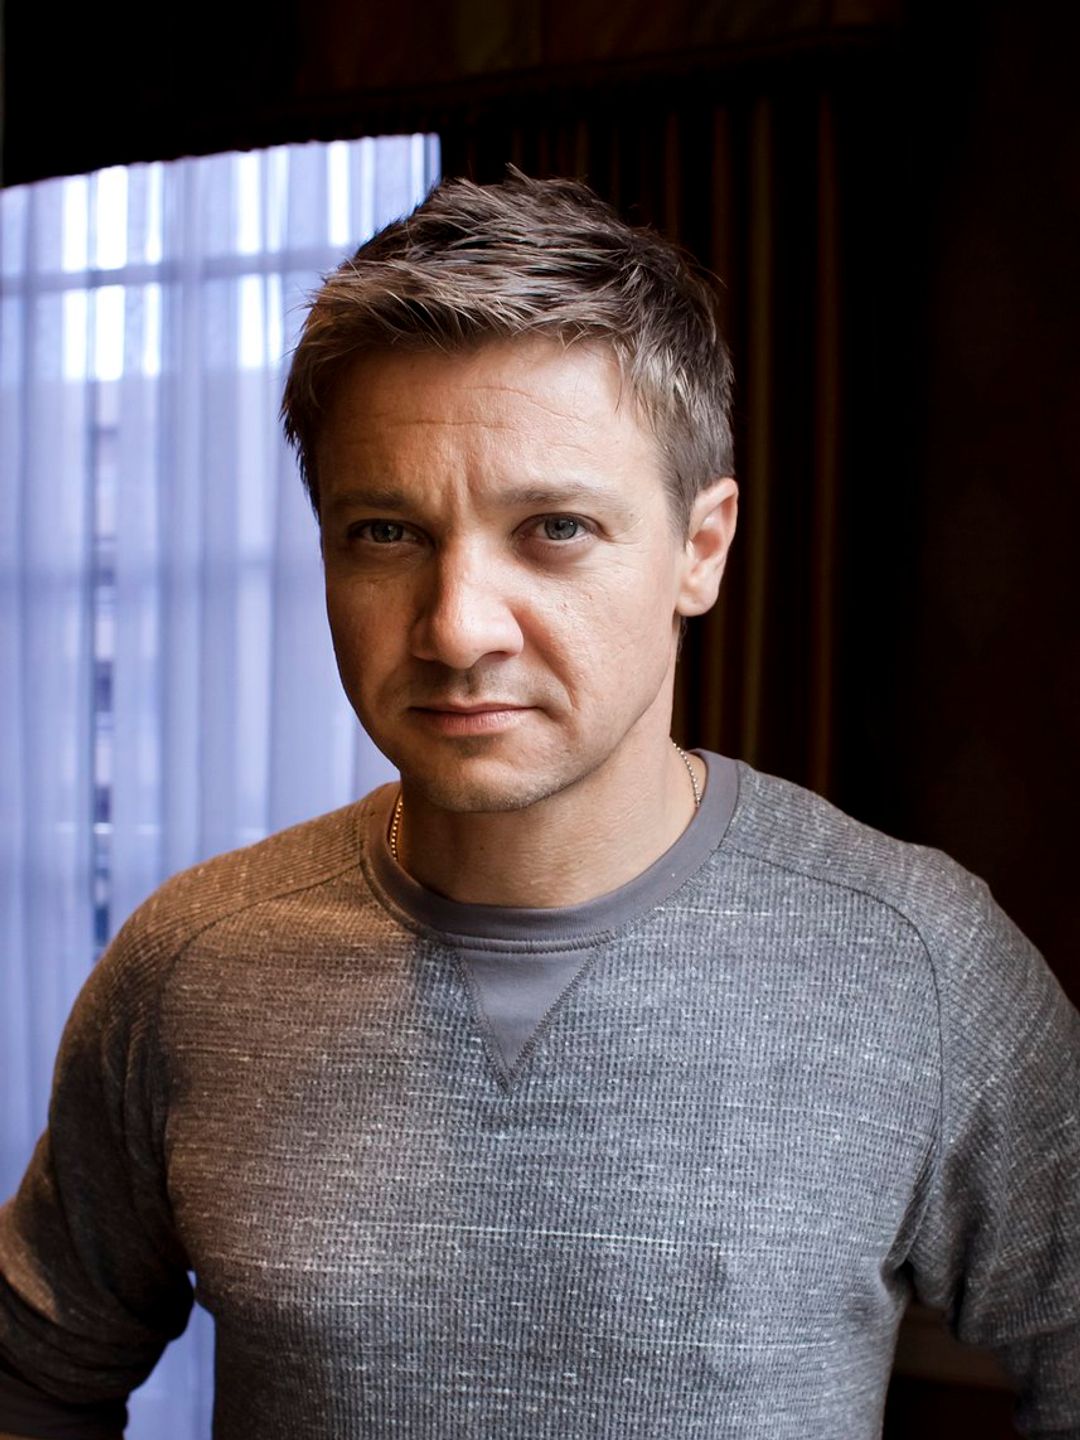 Jeremy Renner personal traits